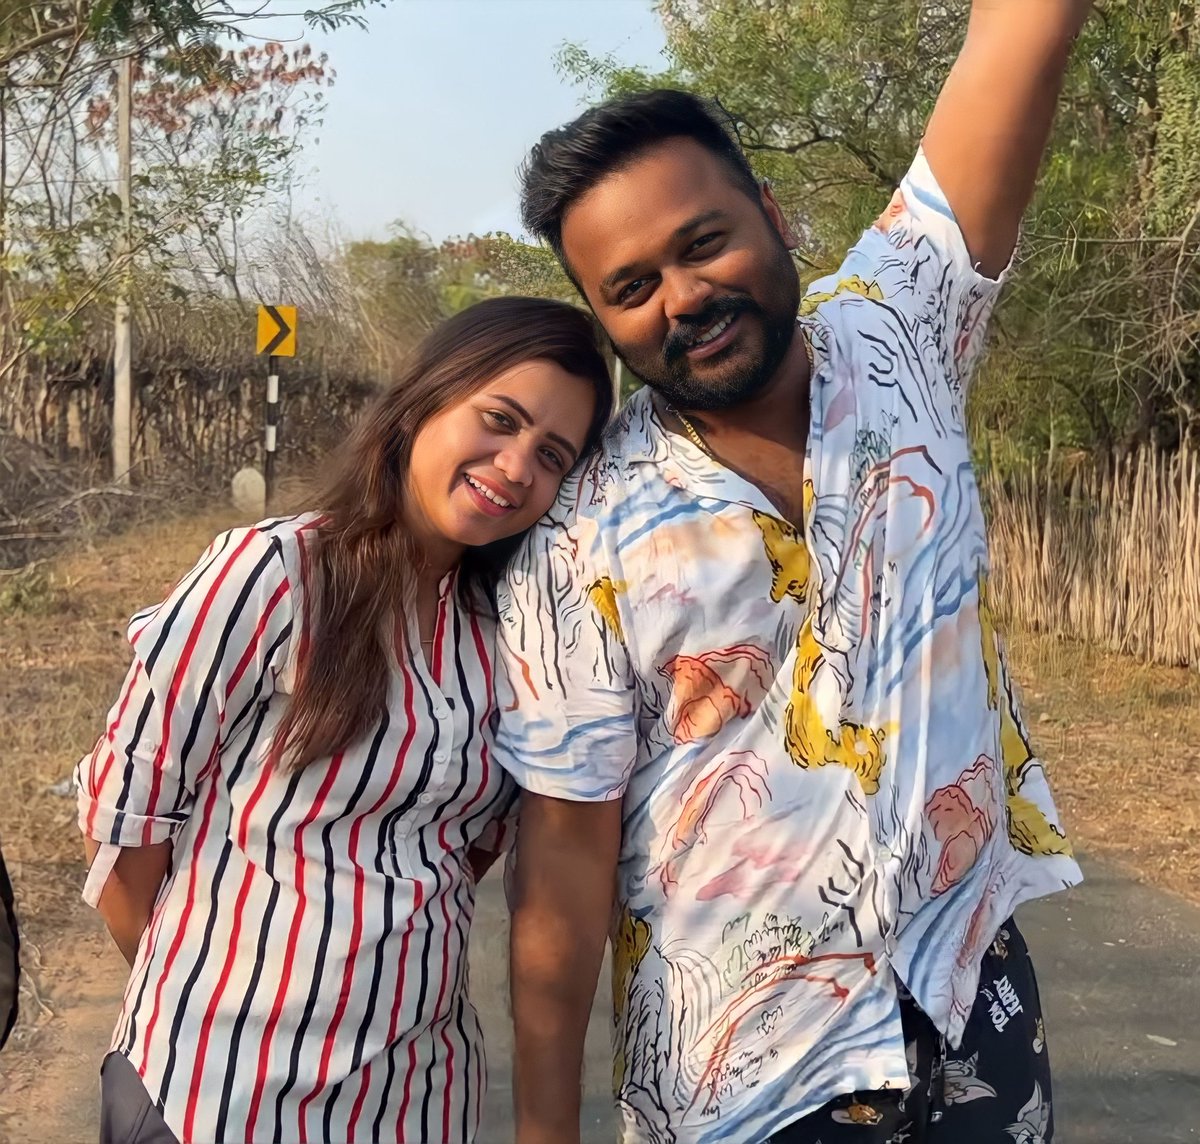 These Two , this frame 💖🧿 So happy to see you win and grow together ☺️ @iamManimegalai #Hussain #HussainManimegalai